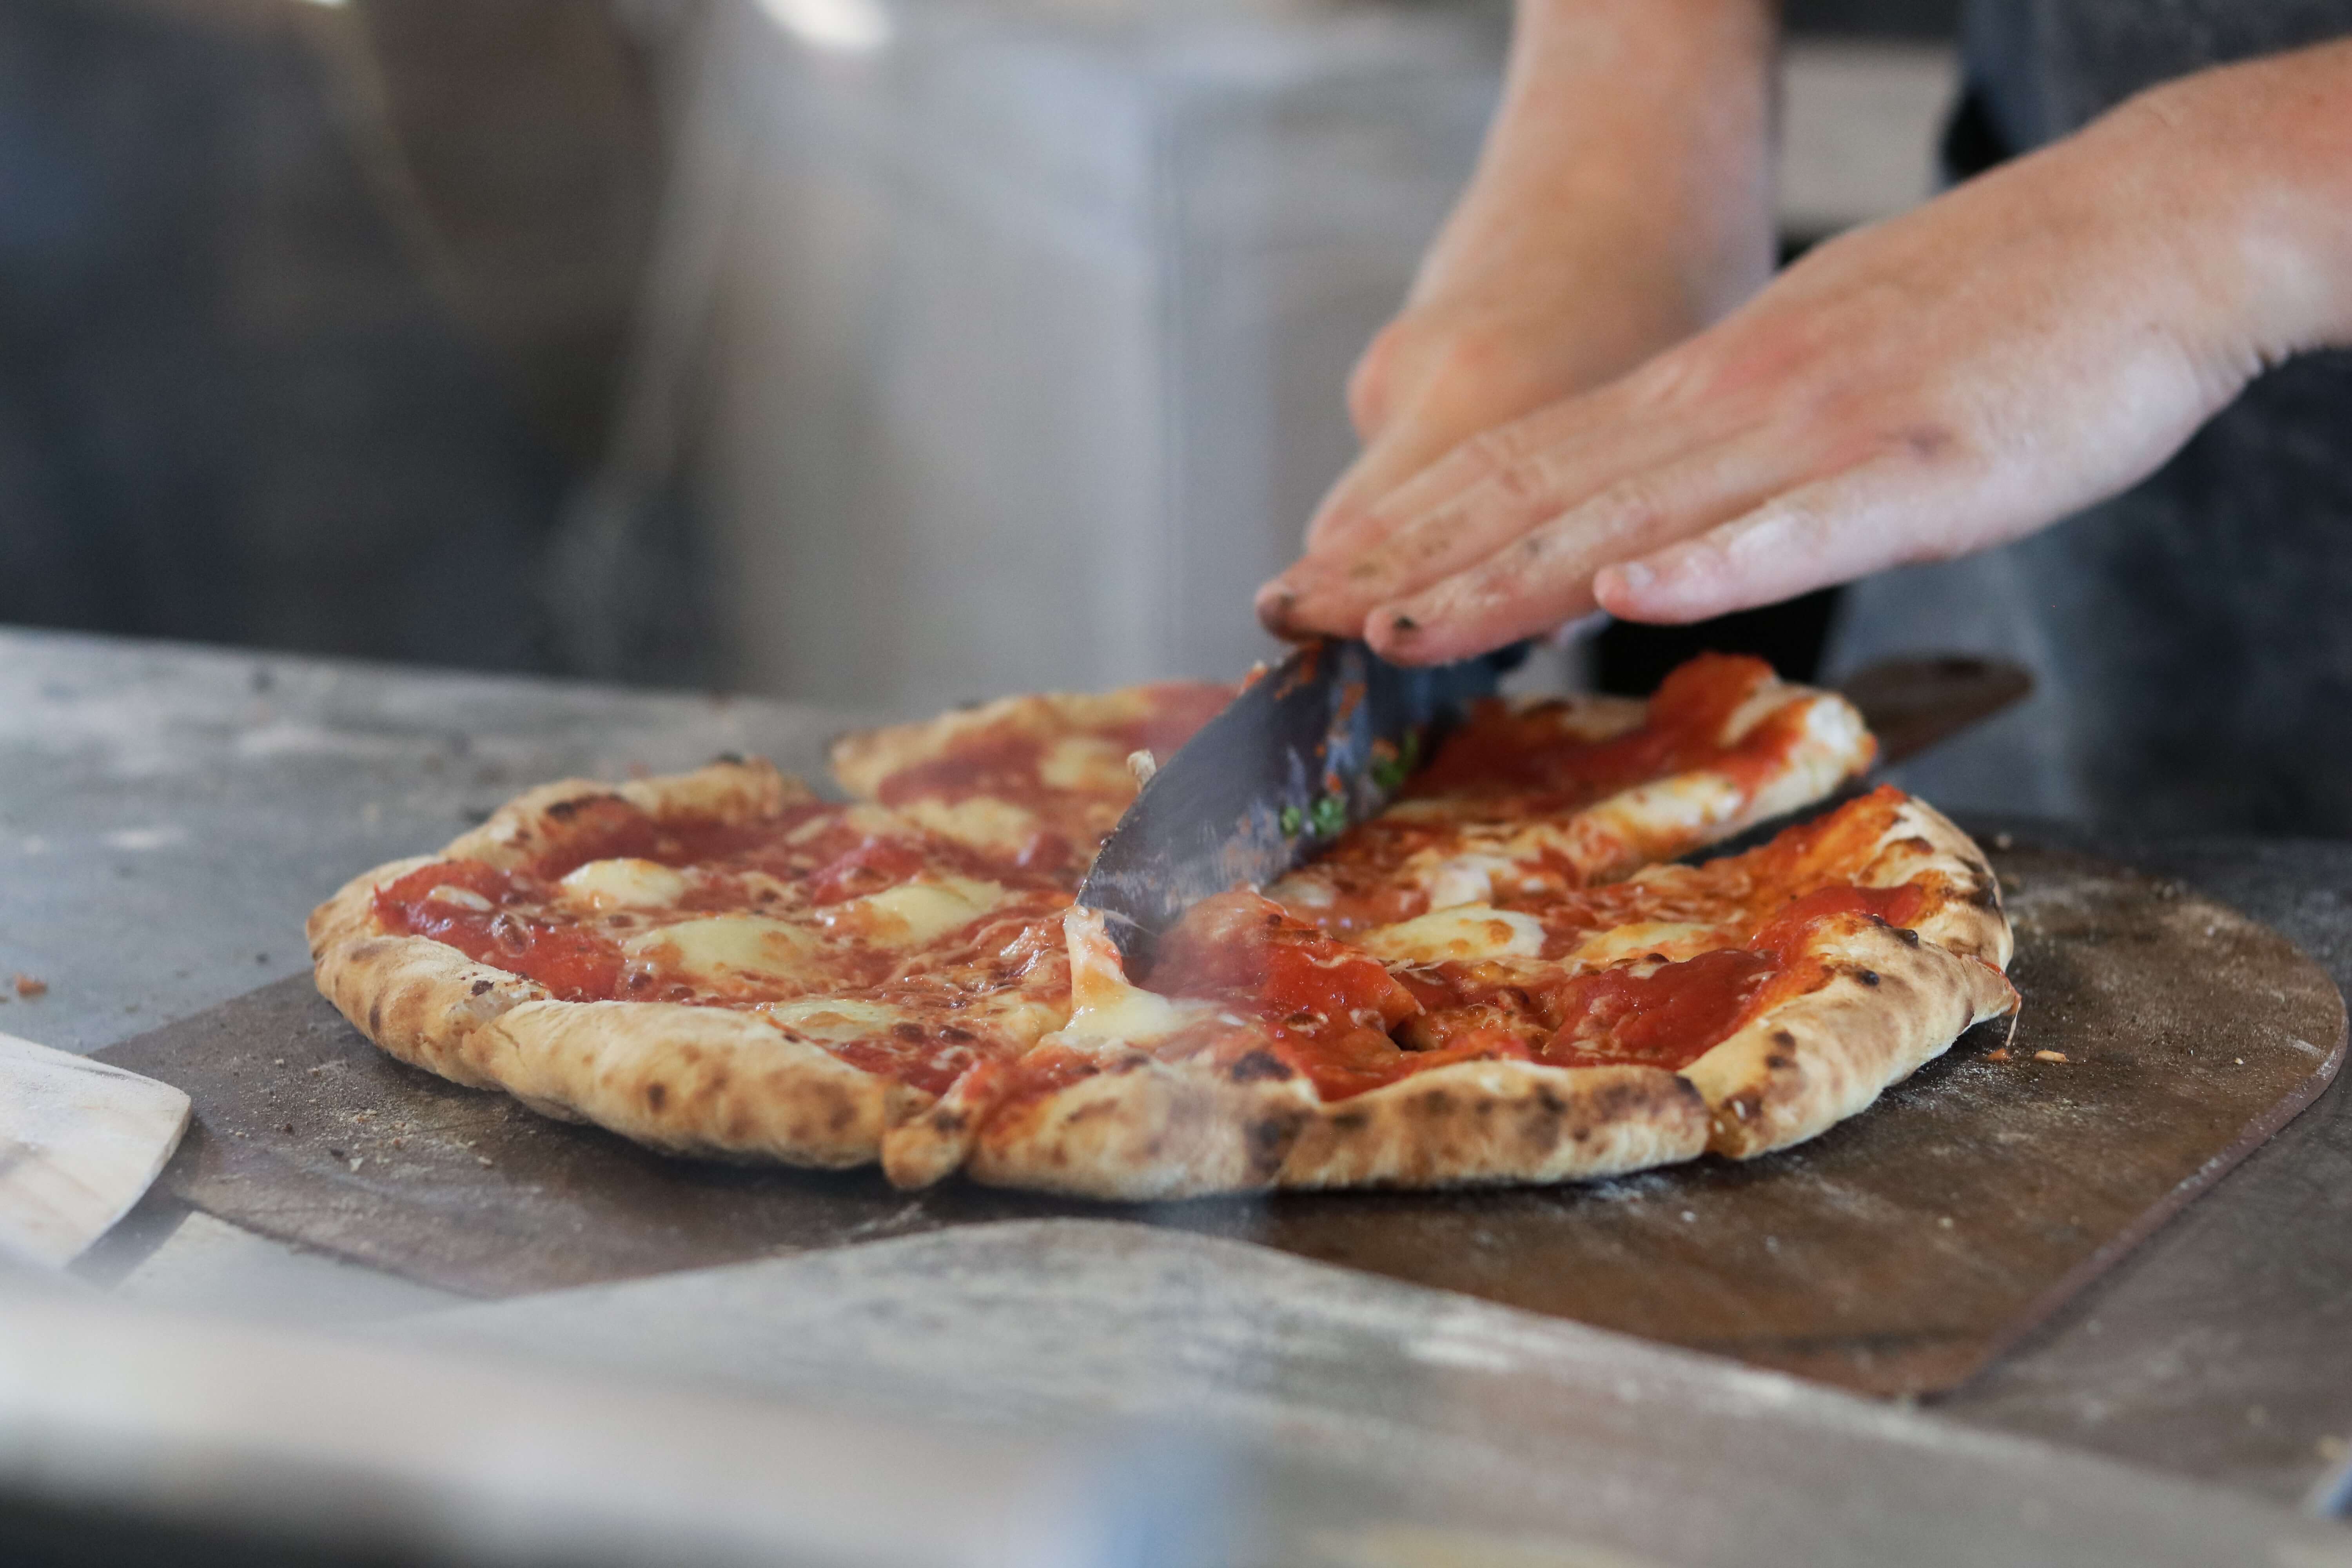 Wood-fired pizza oven - what you need to know